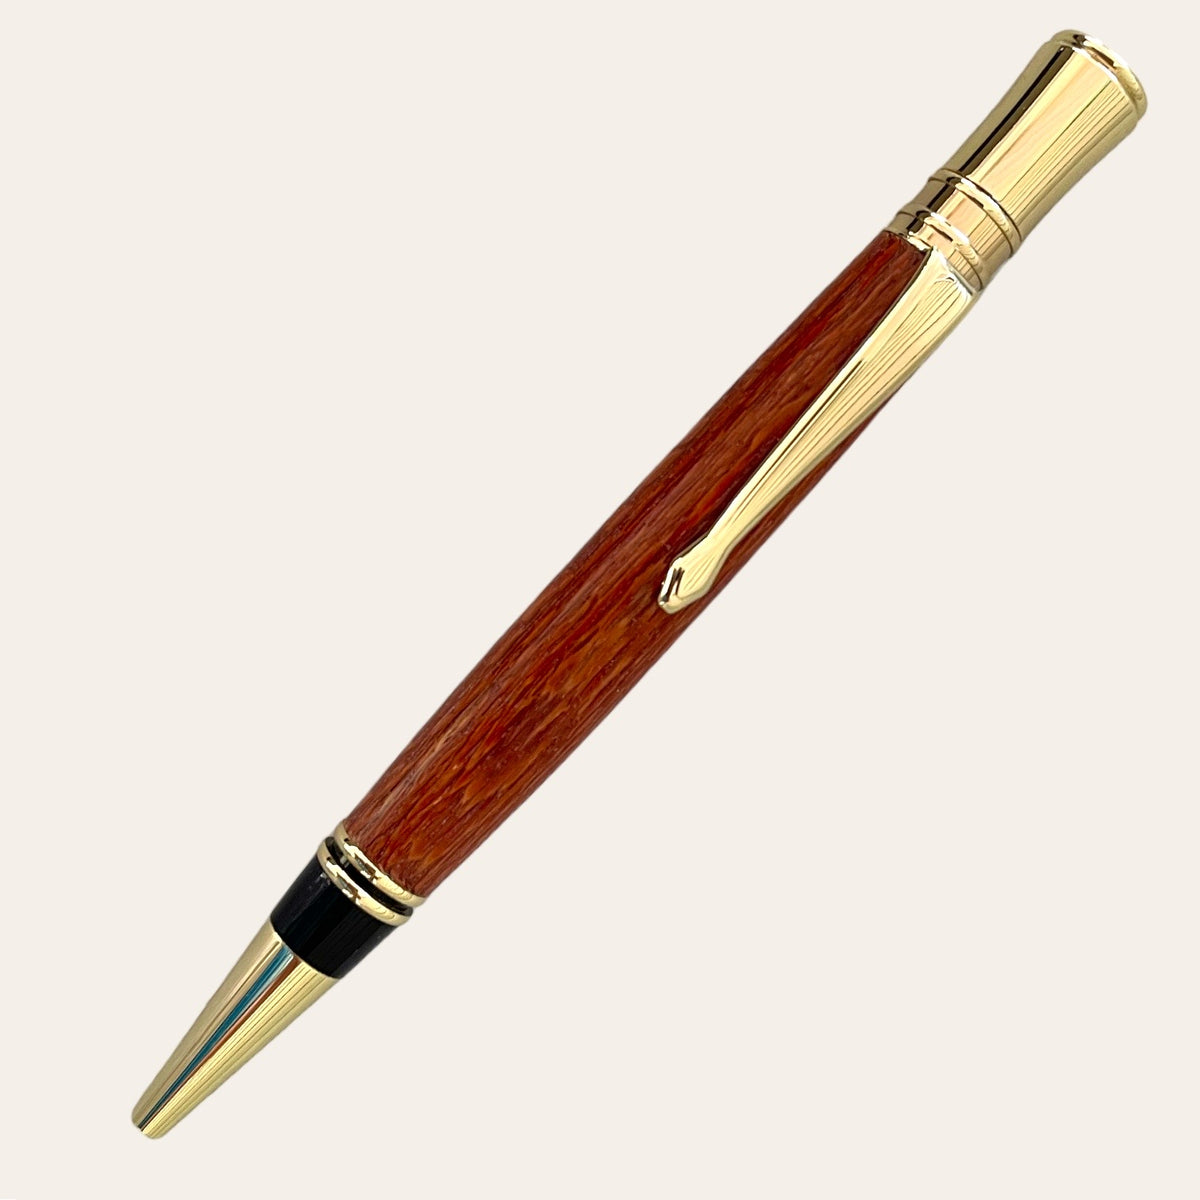 Stunning gold trim for the executive pen for the letter opener set. Hand turned with leopard wood. Paul's hand turned creations